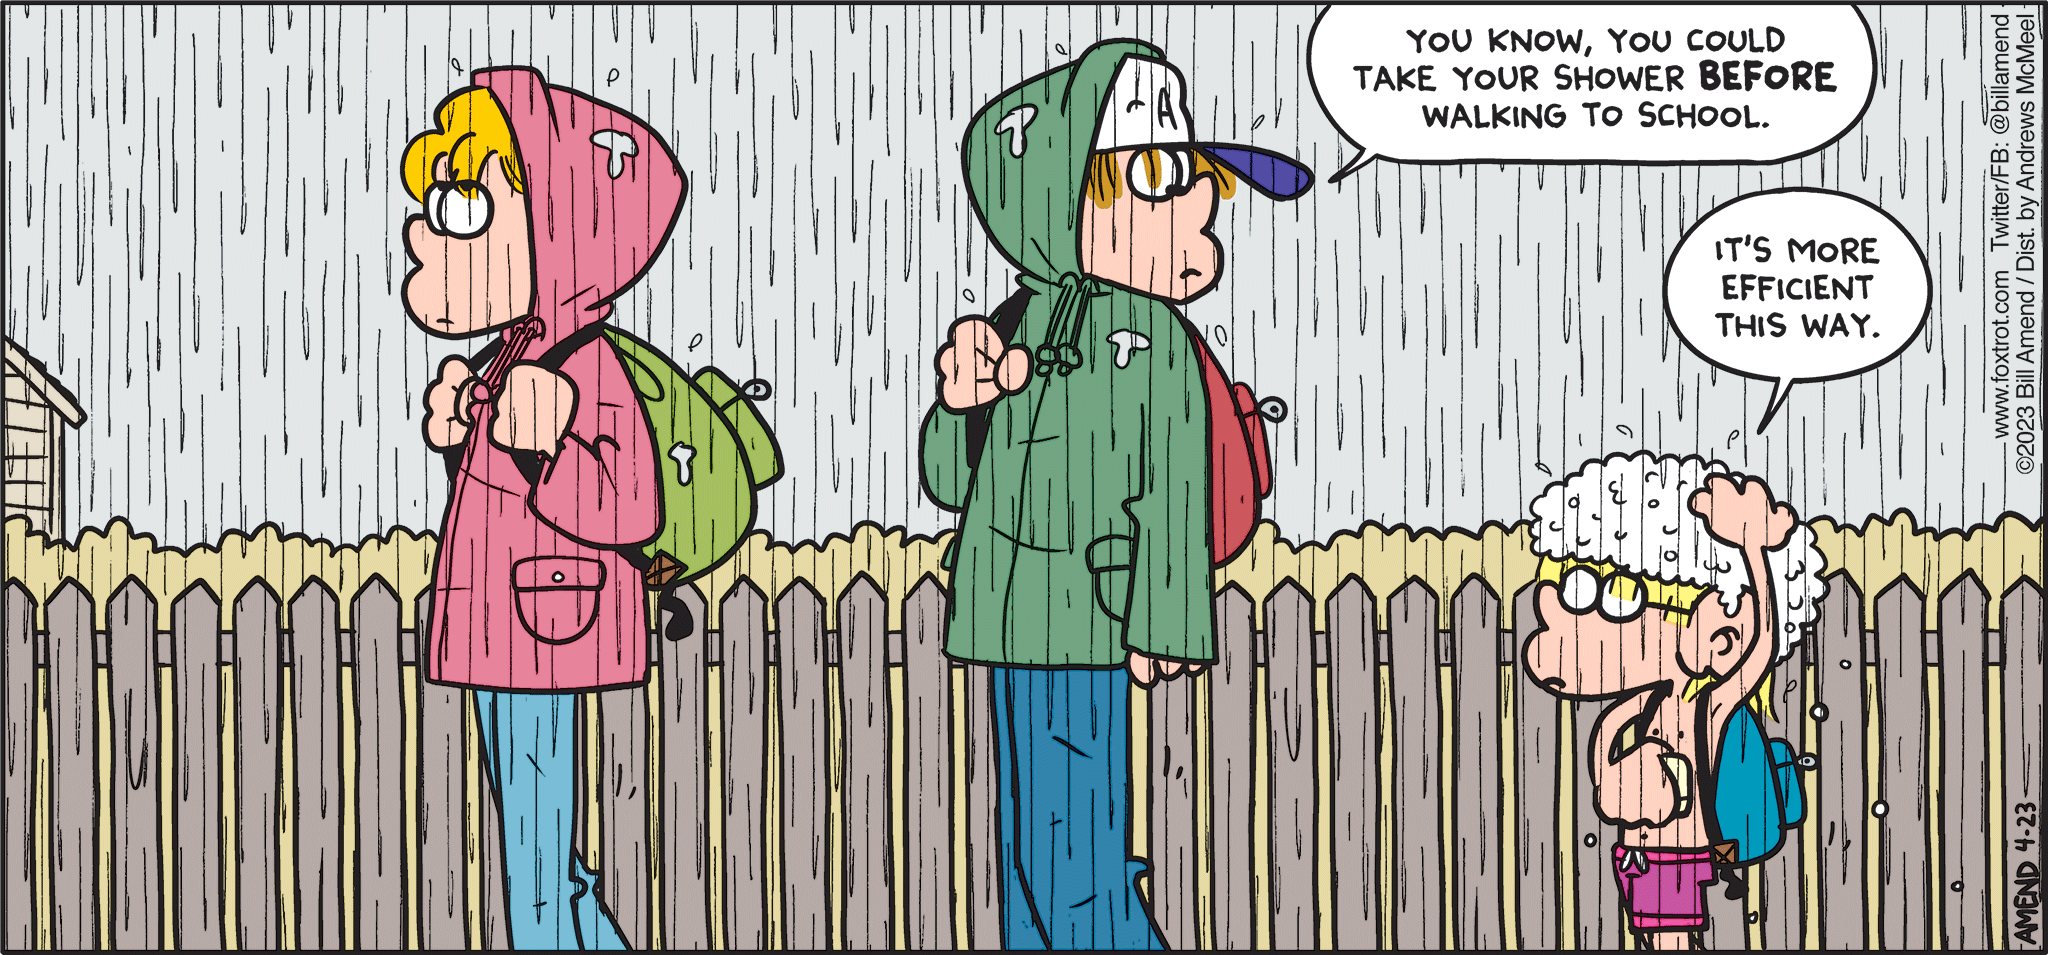 FoxTrot comic strip by Bill Amend - "Power Shower" published April 23, 2023 - Transcript: Peter Fox: You know, you could take your shower BEFORE walking to school. Jason Fox: It's more efficient this way. 